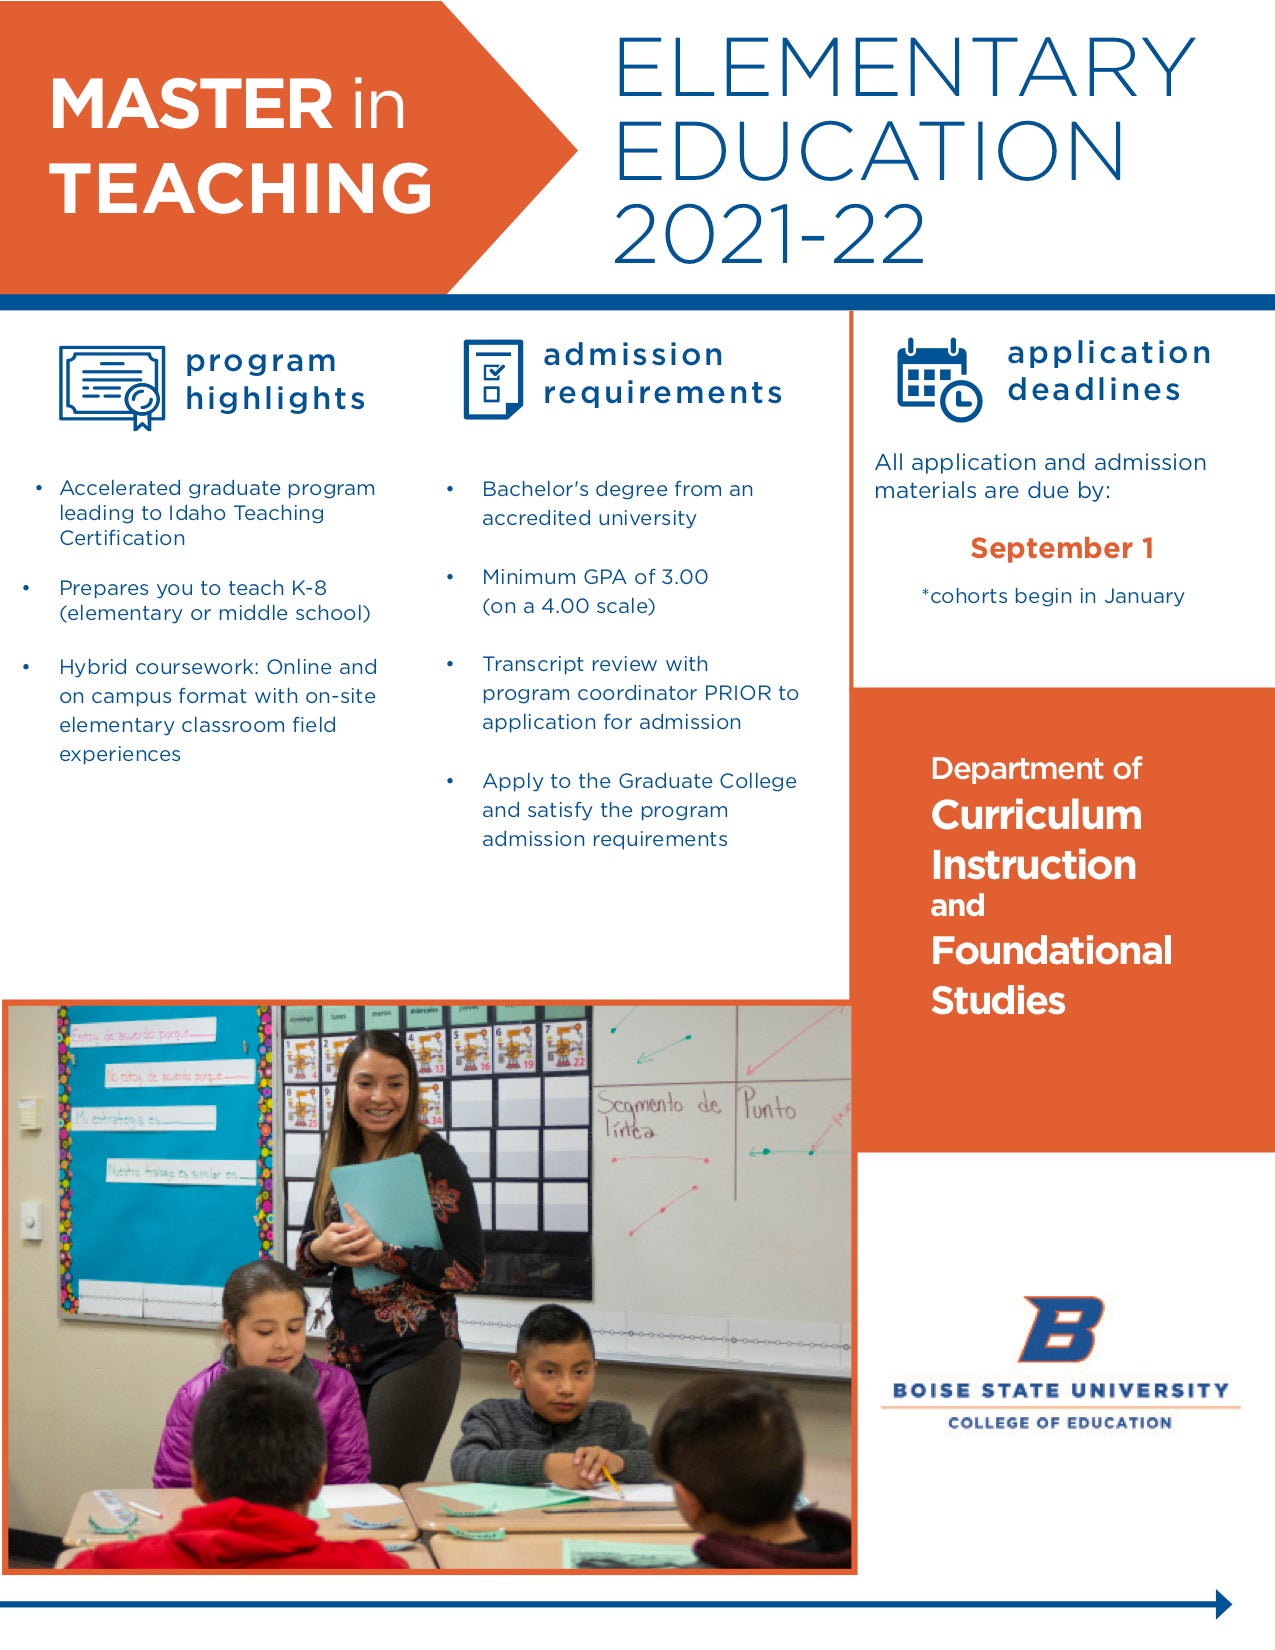 Visual Advising Guide for the Master in Teaching in Elementary Education